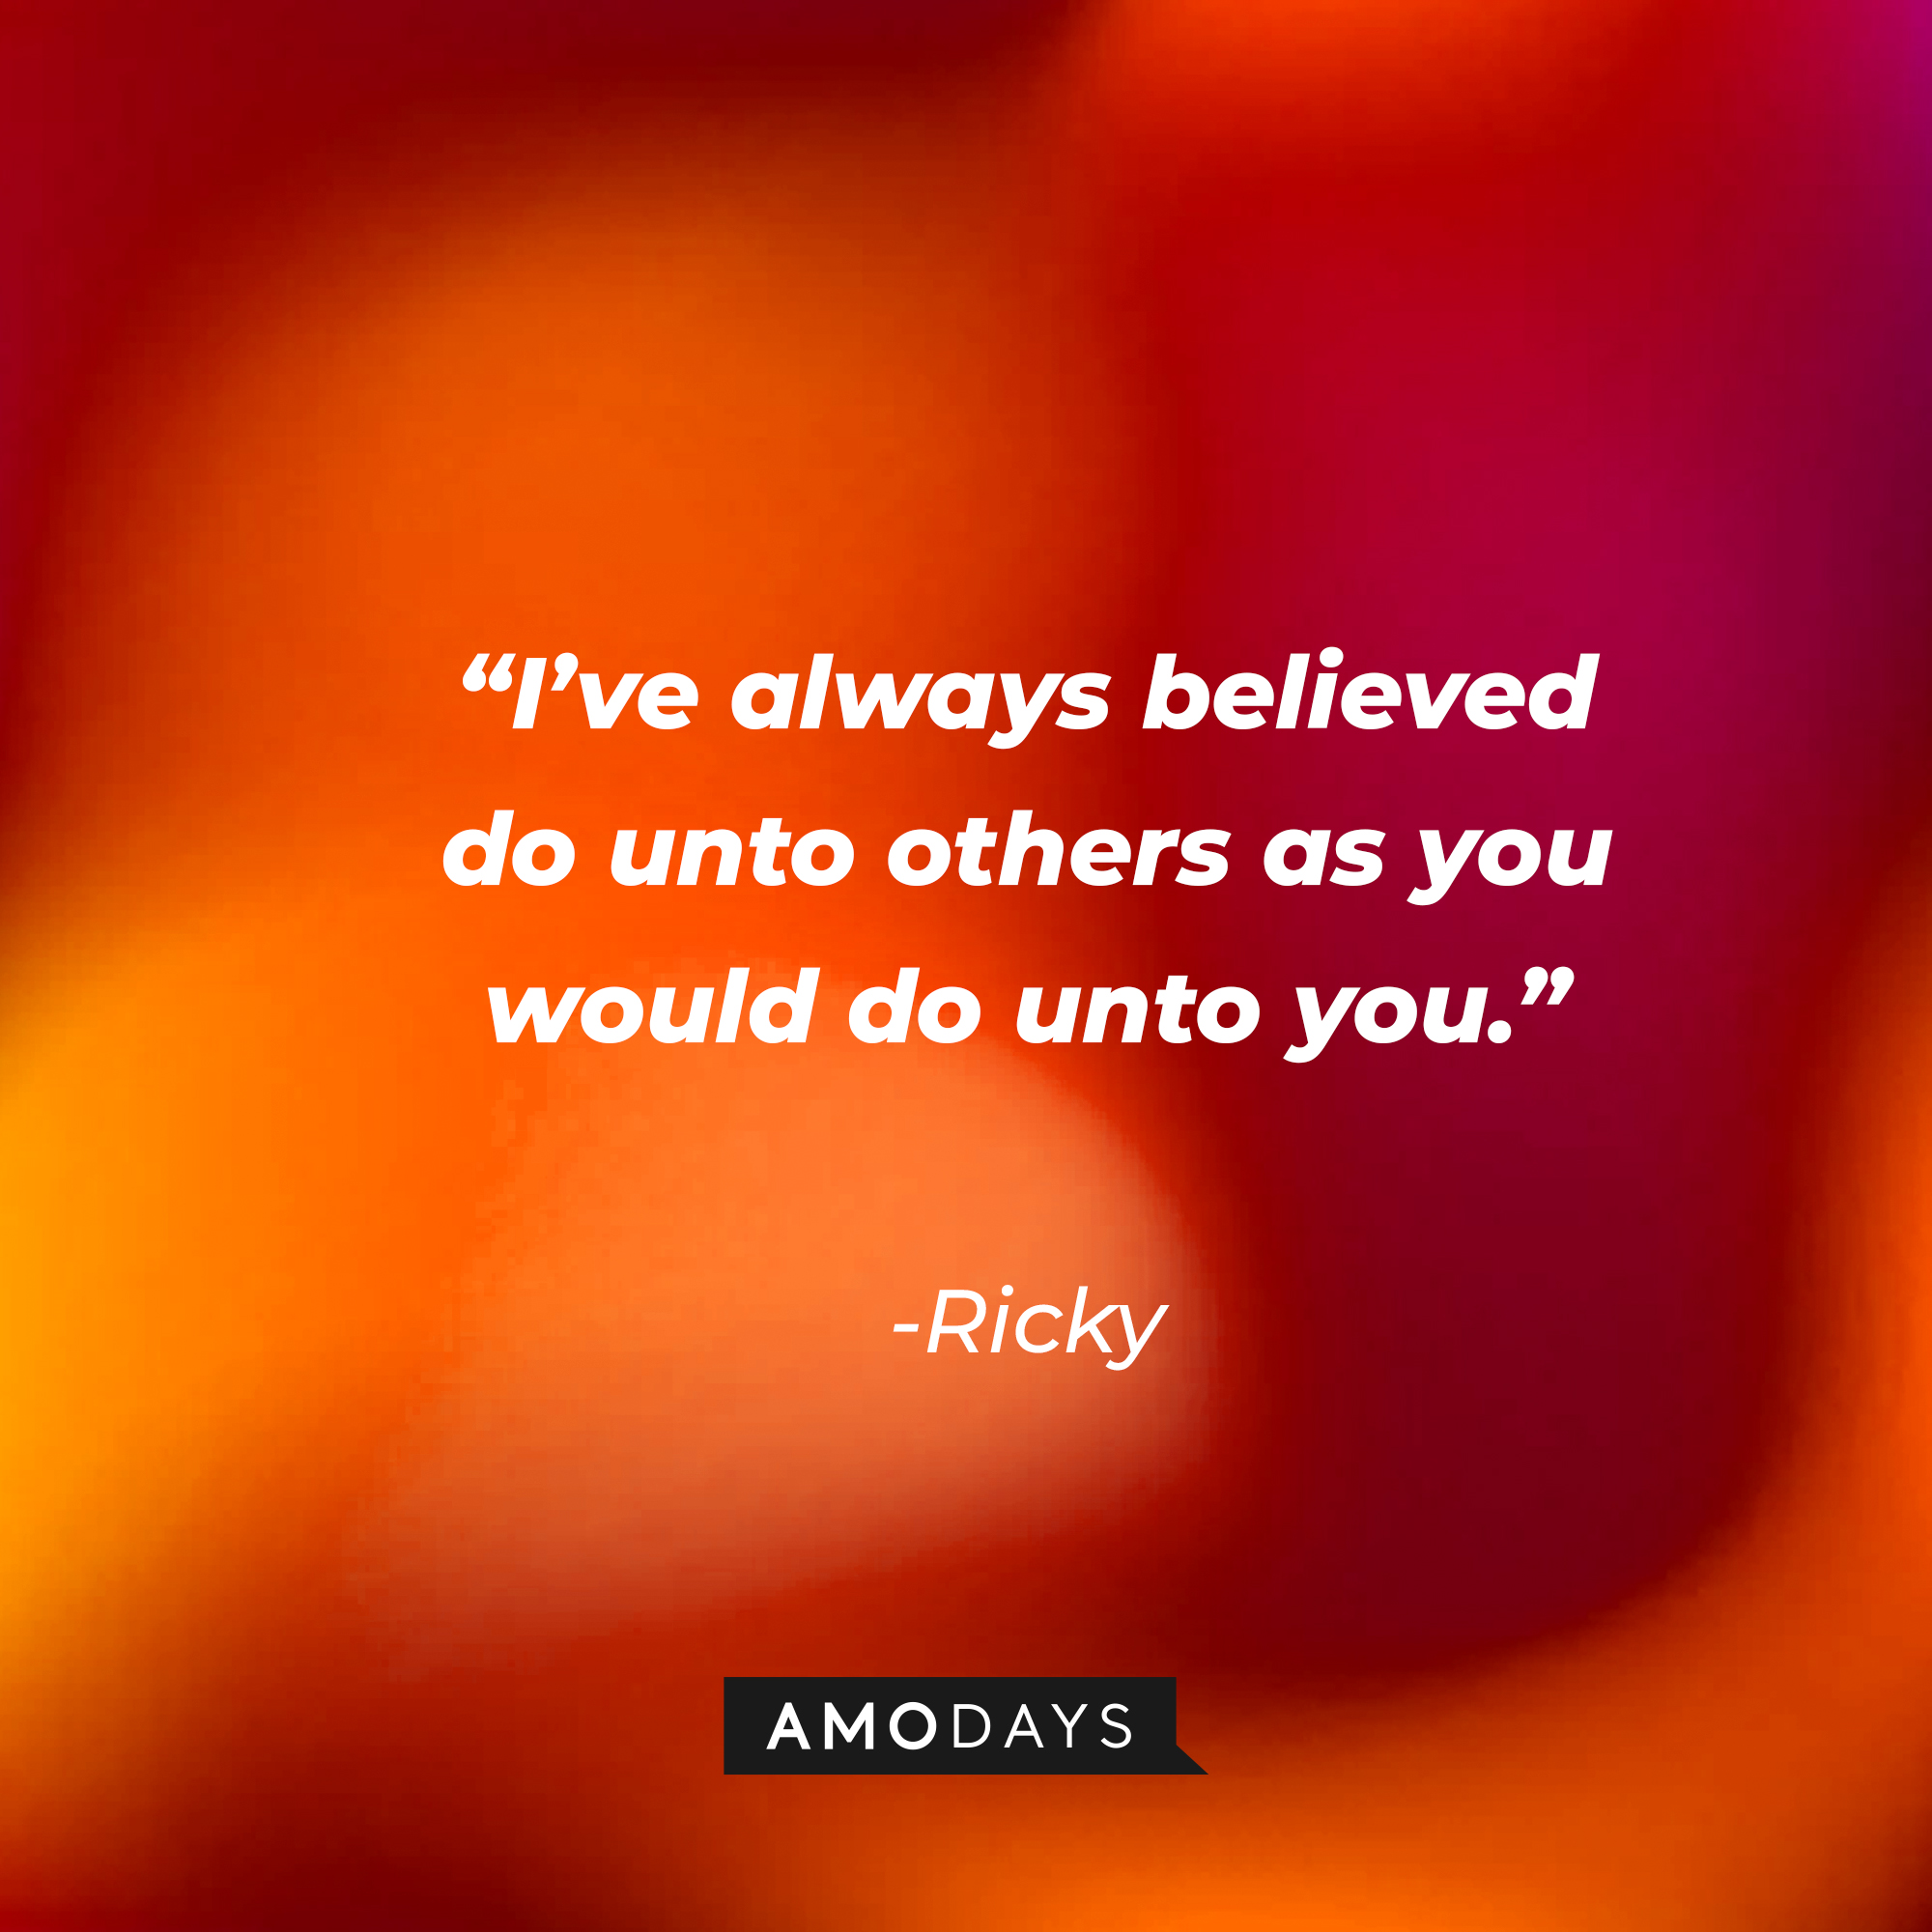 Ricky's quote: “I’ve always believed do unto others as you would do unto you.” | Source: Amodays